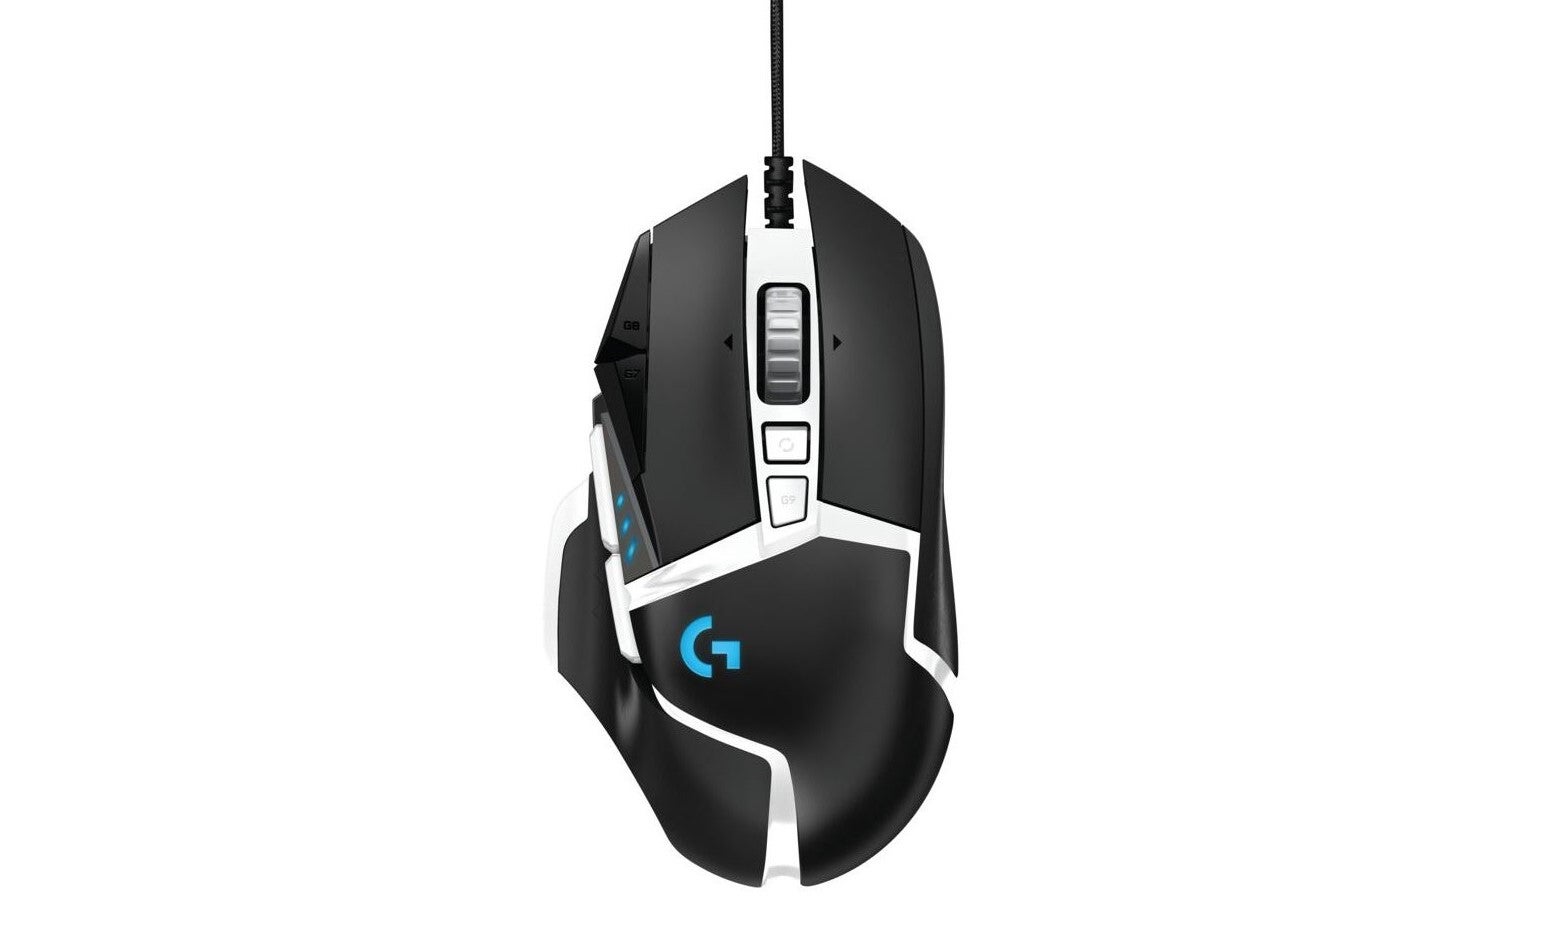 The Logitech G502 SE Hero gaming mouse against a white background.